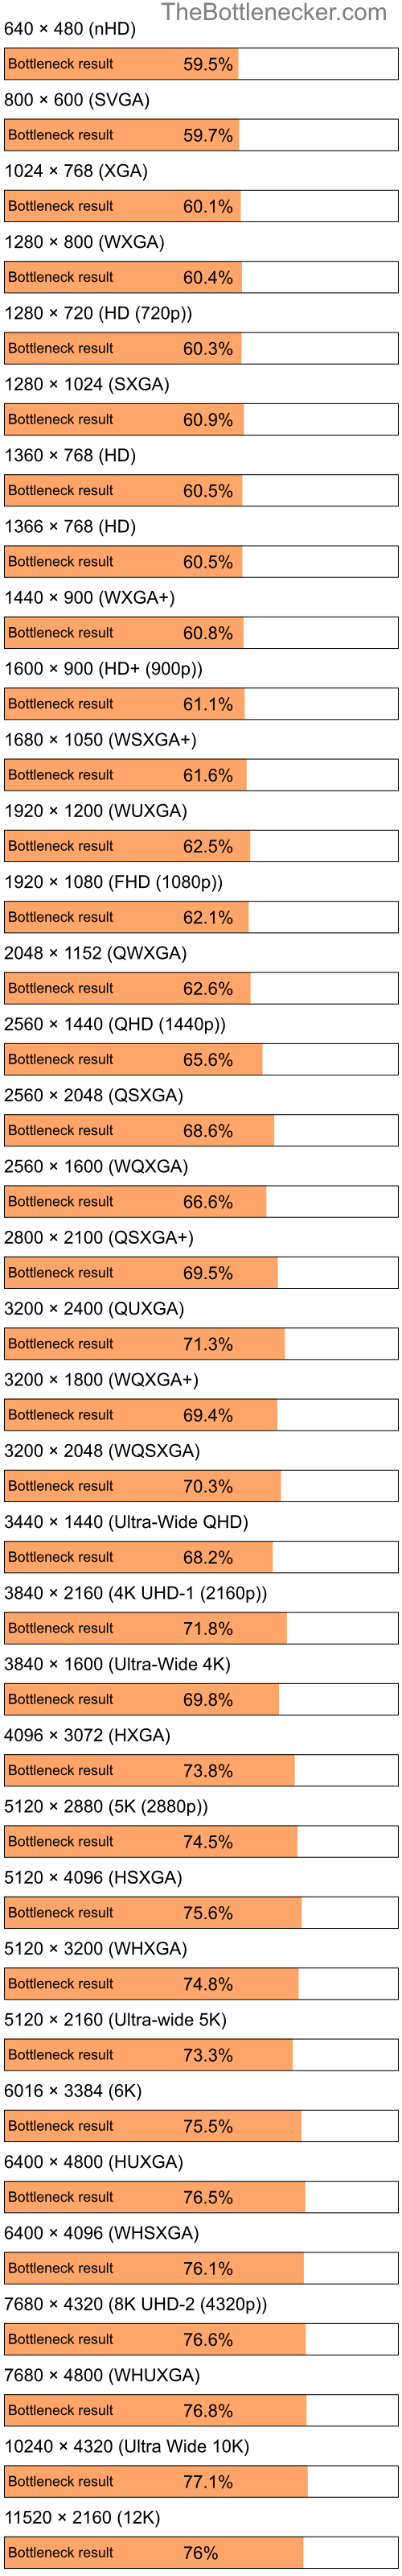 Bottleneck results by resolution for Intel Pentium 4 and AMD Radeon X600 256MB HyperMemory in Processor Intense Tasks